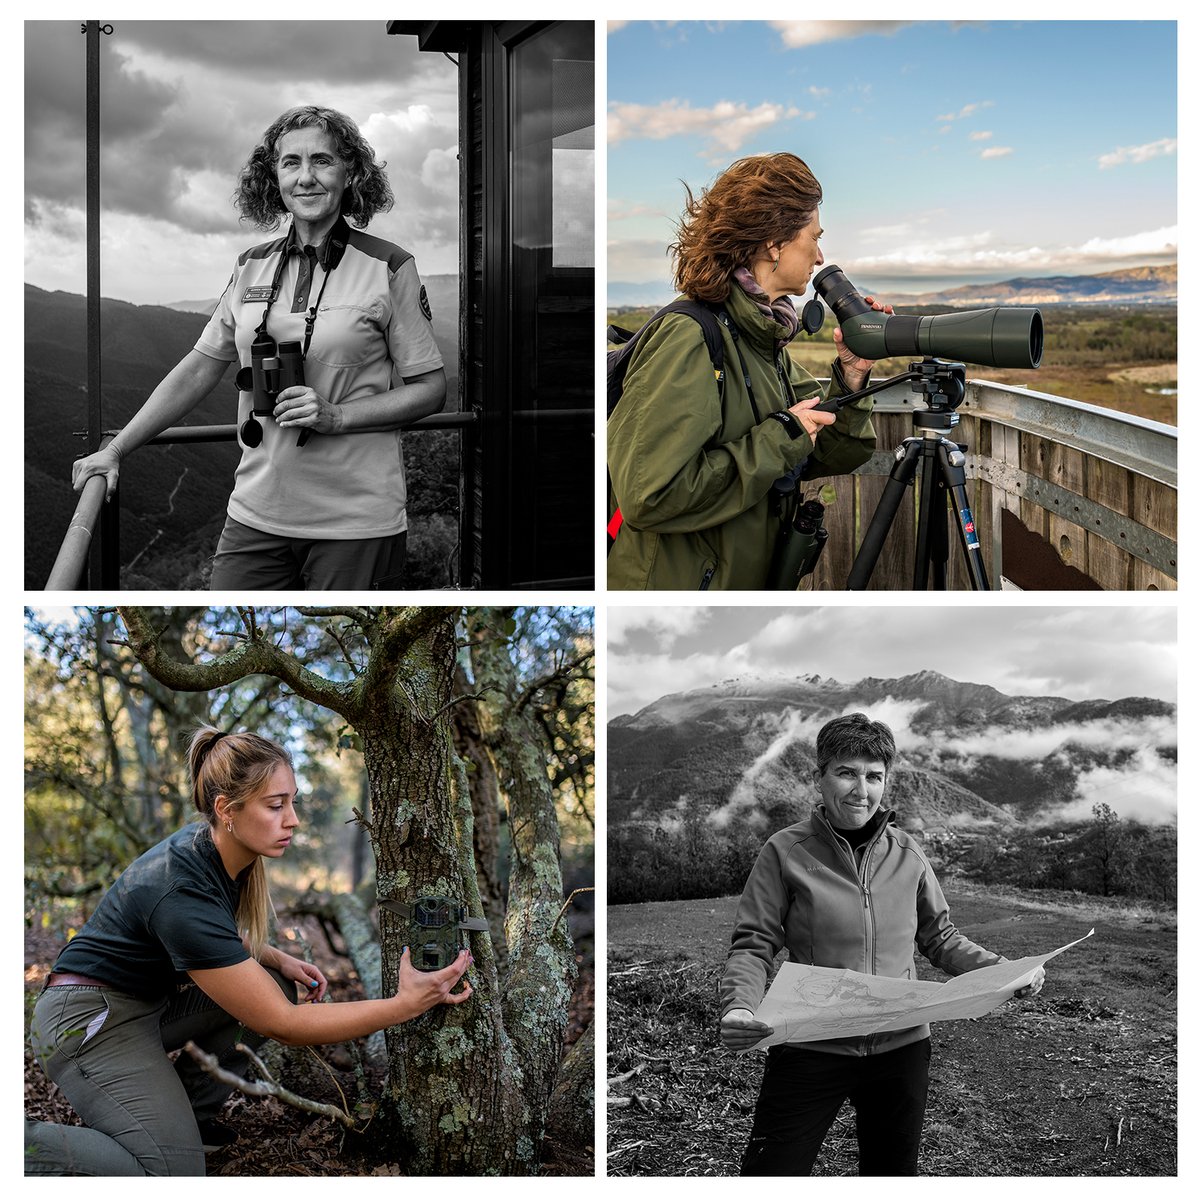 #Emboscades.Dones I Bosc (Women of the Forest) On view until April 14th @palaurobert A portrait of 18 amazing women in the forest sector. Photos & Video🙏 @AnnaSanitjas @anajorr @Lapageoriginal @kasacuberta @kanseisounds @accioclimatica @dmascort @agriculturacat